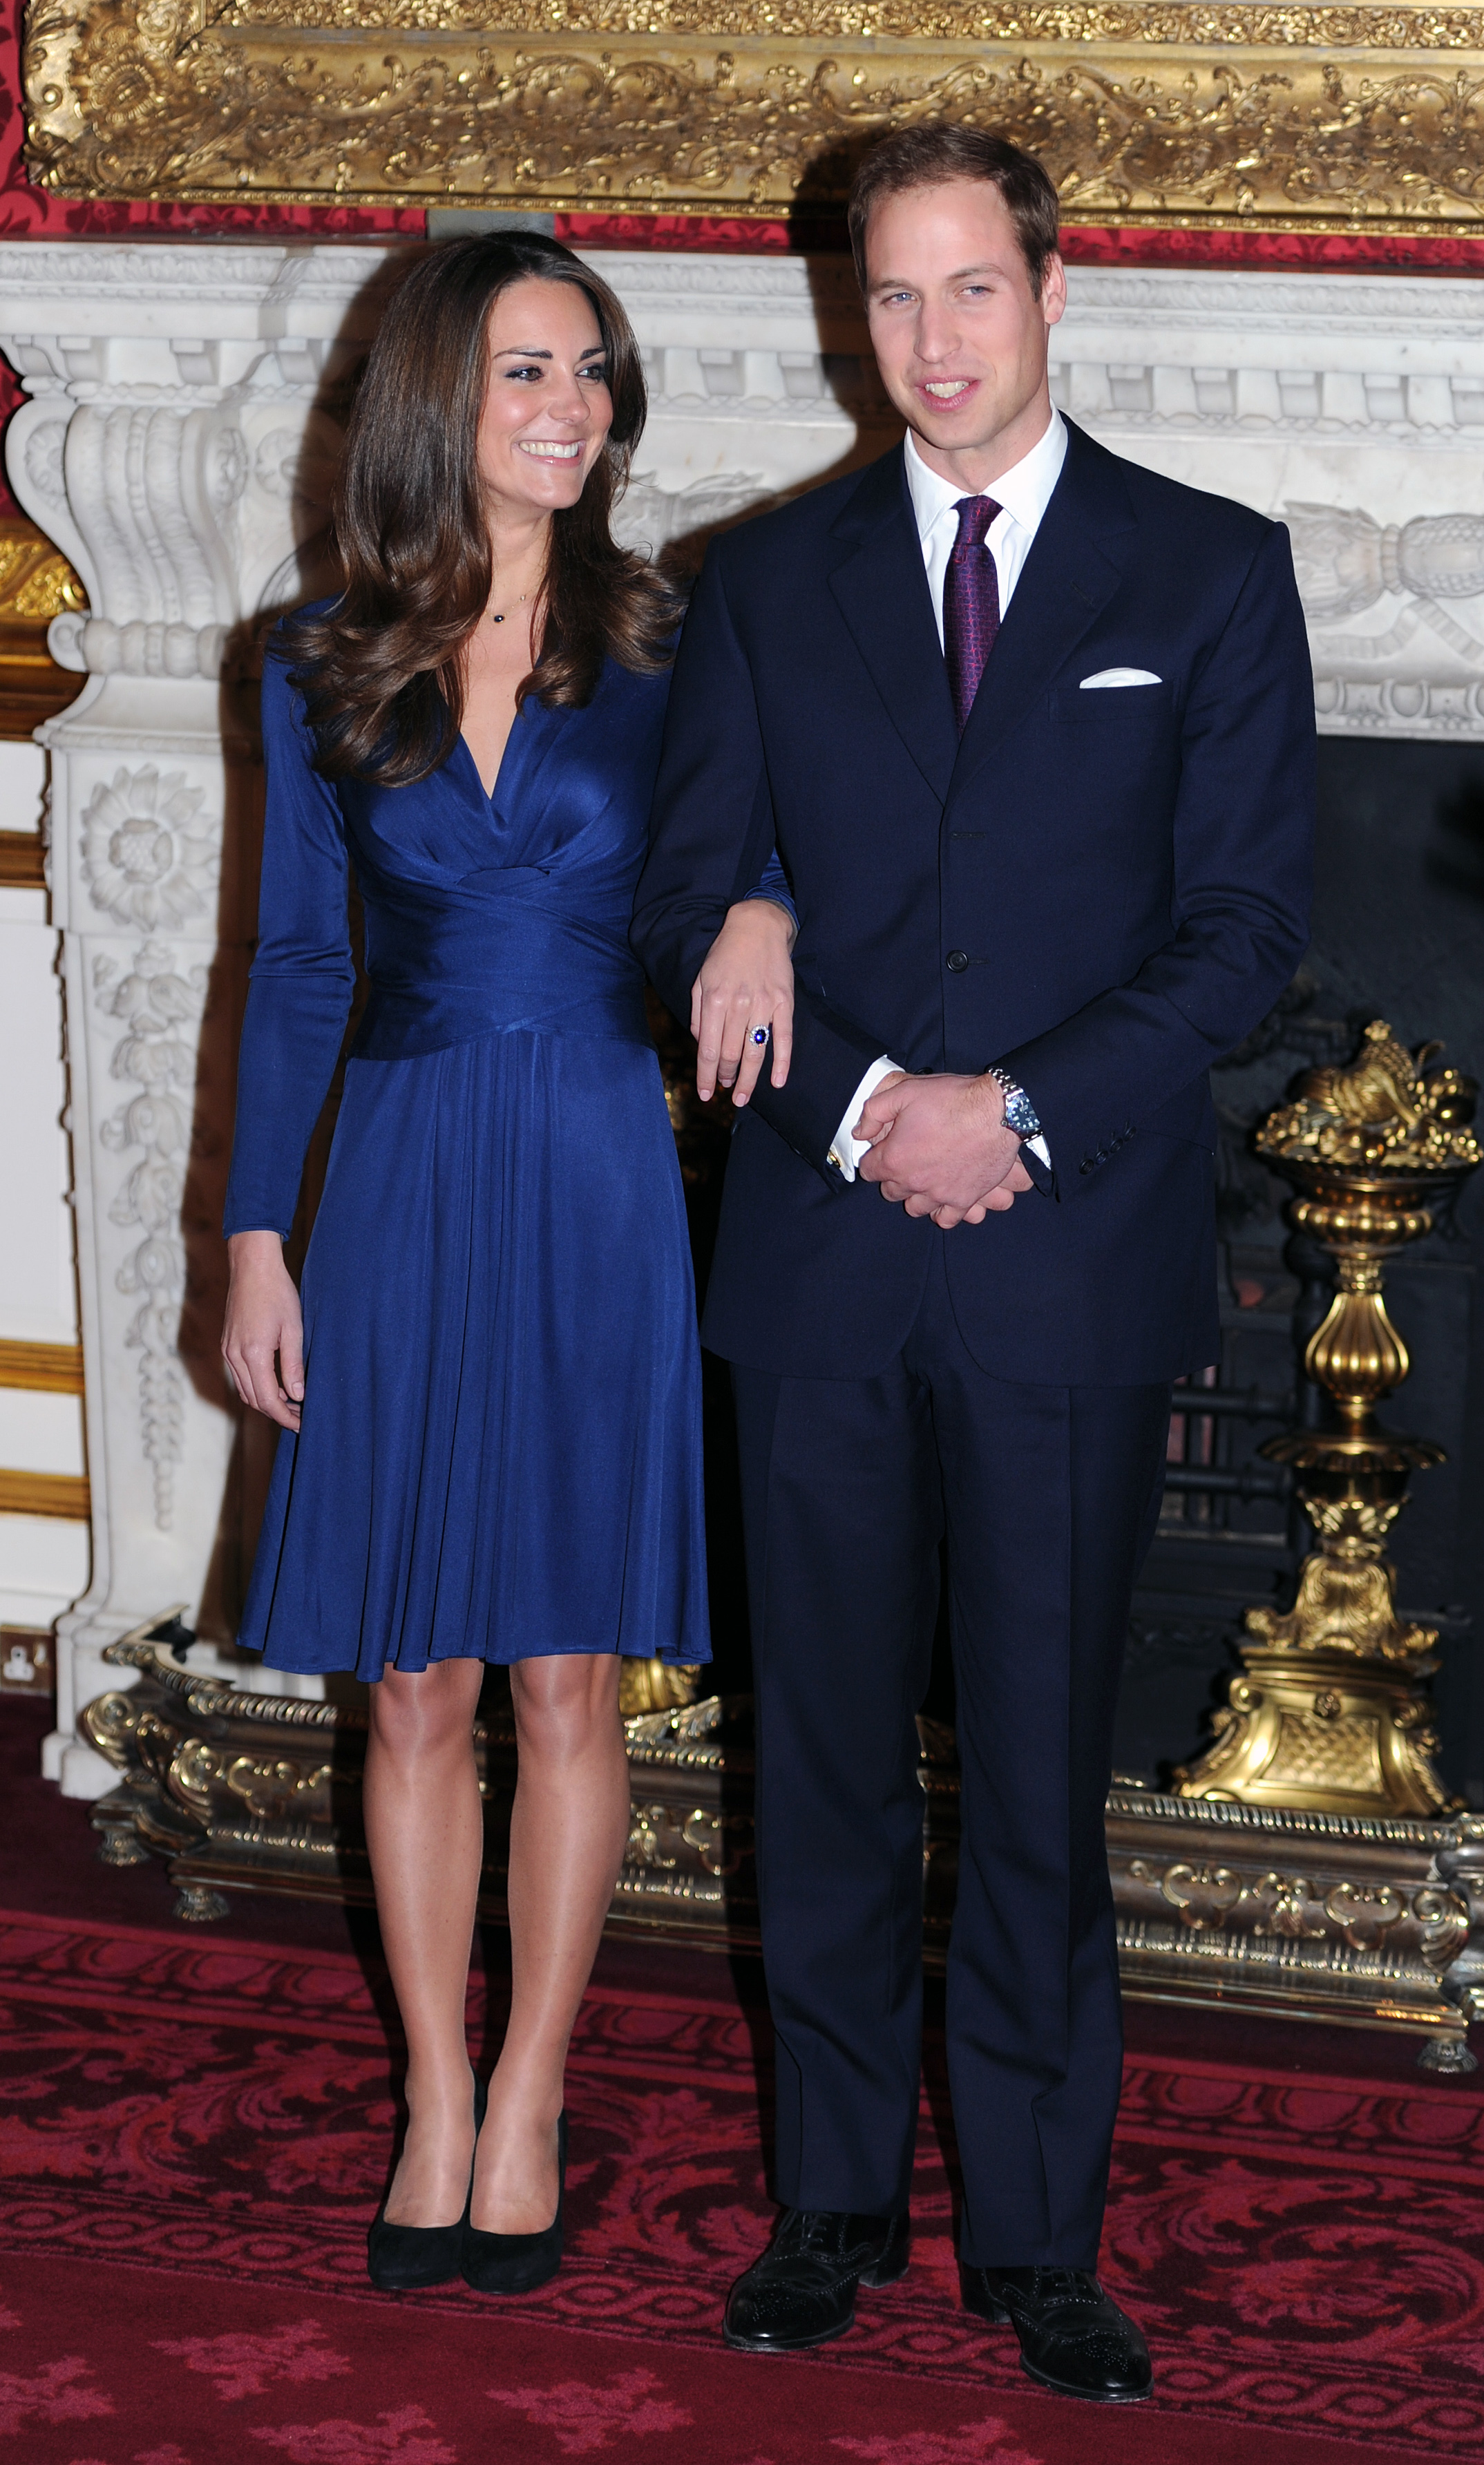 Prince William and Catherine Middleton announce their engagement on November 16, 2010 in London, England | Source: Getty Images